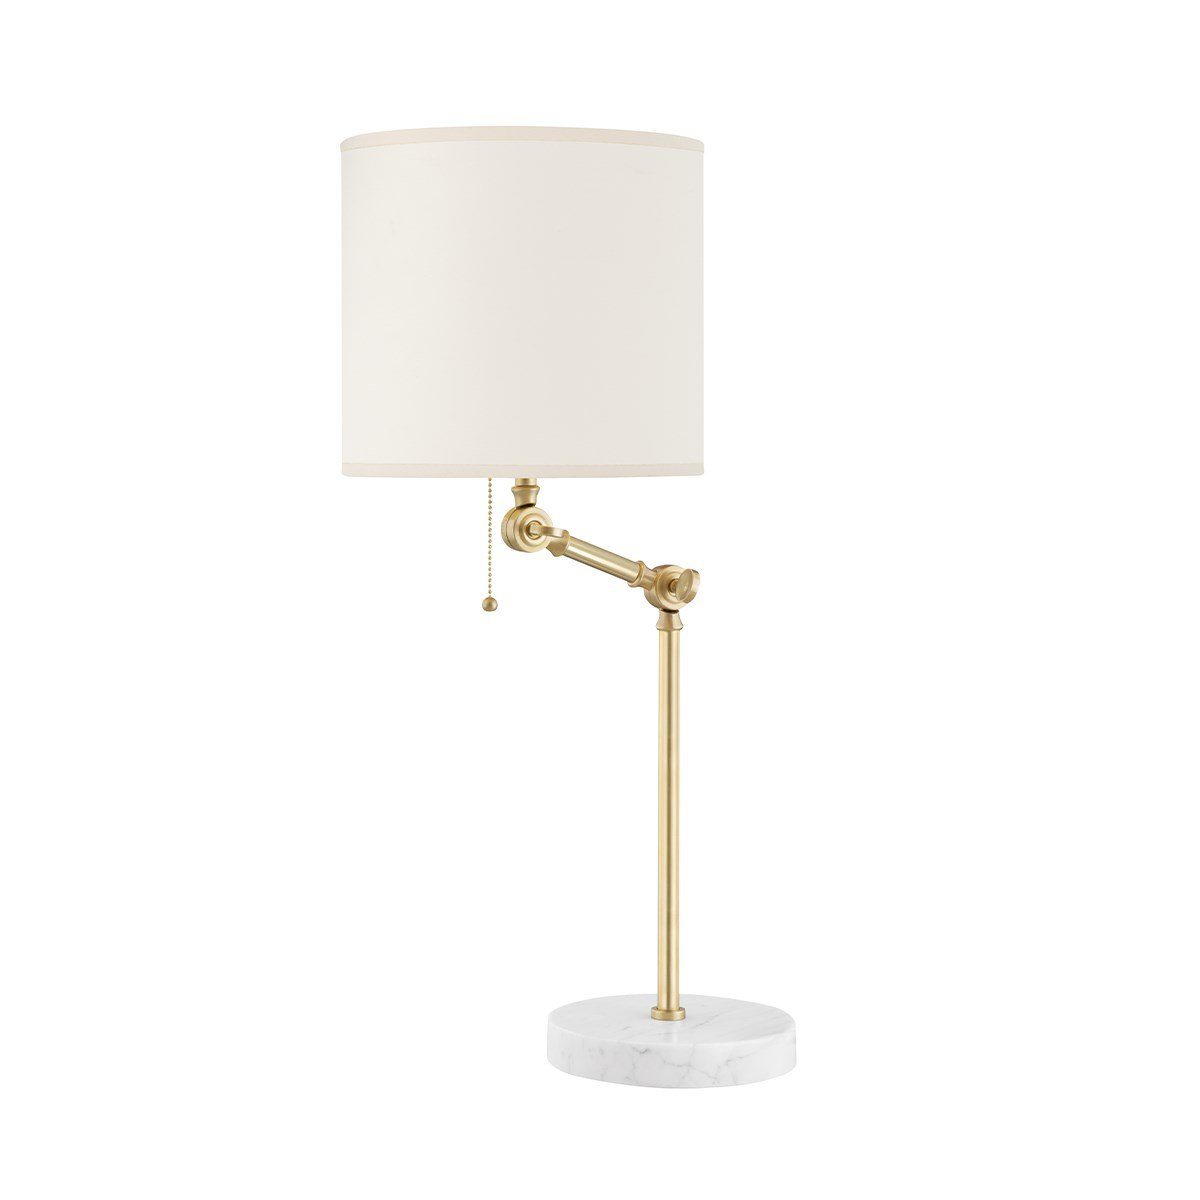 Clovelly Table Lamp Aged Brass. Left side view. 